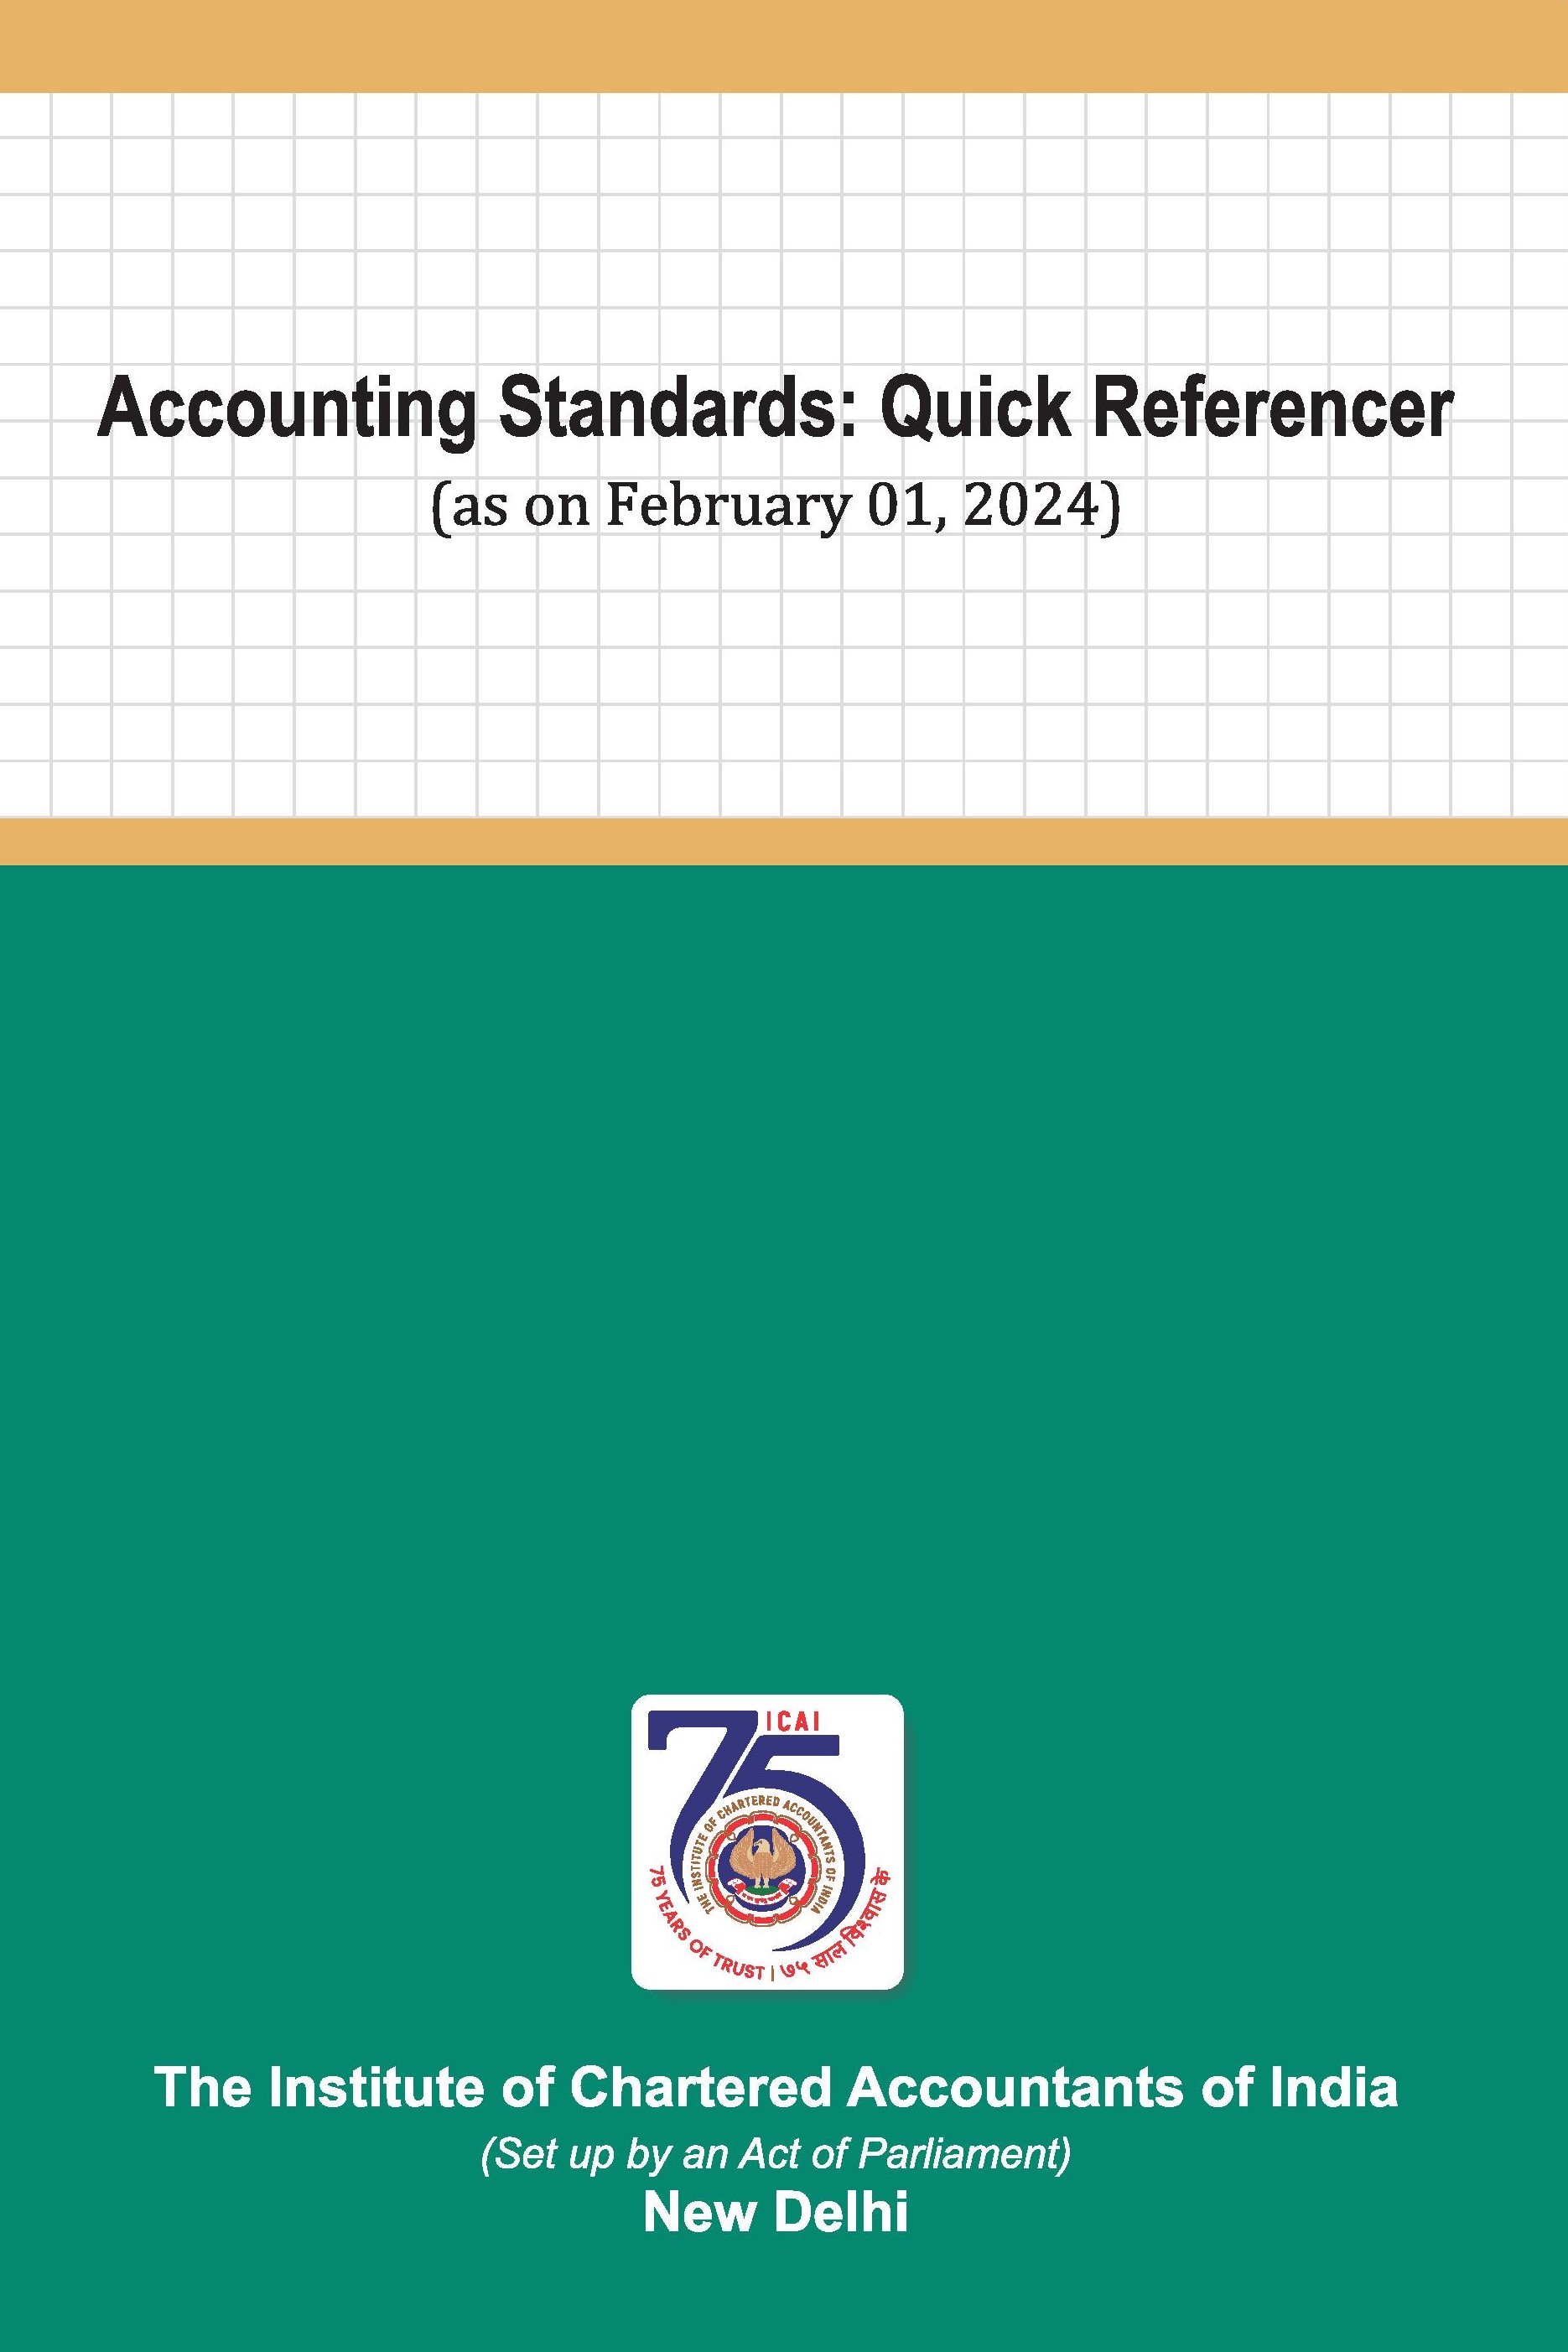 Accounting Standards: Quick Referencer (As on February 1, 2024)